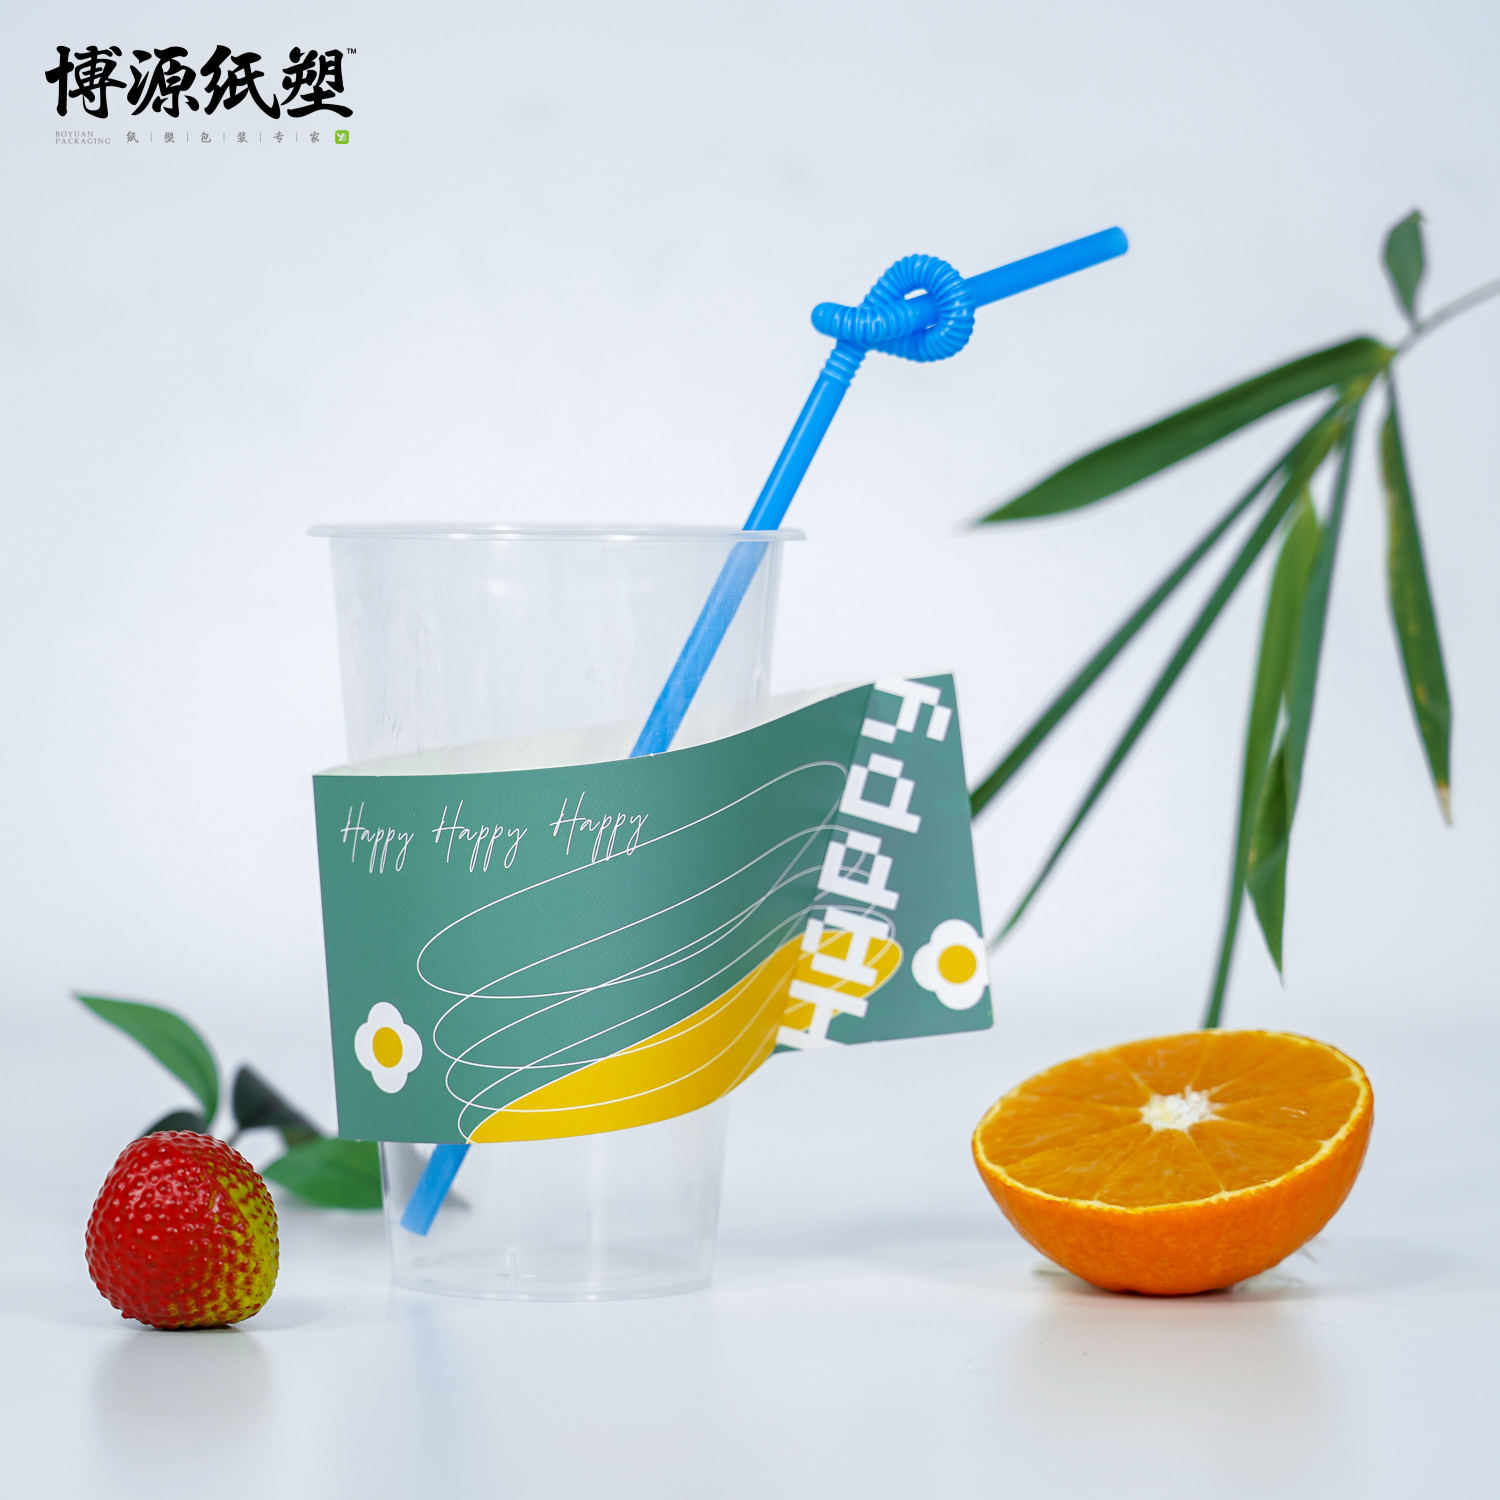 U Types Special Design Disposable Plastic Cup PP Cup PET Cup Injection Cup